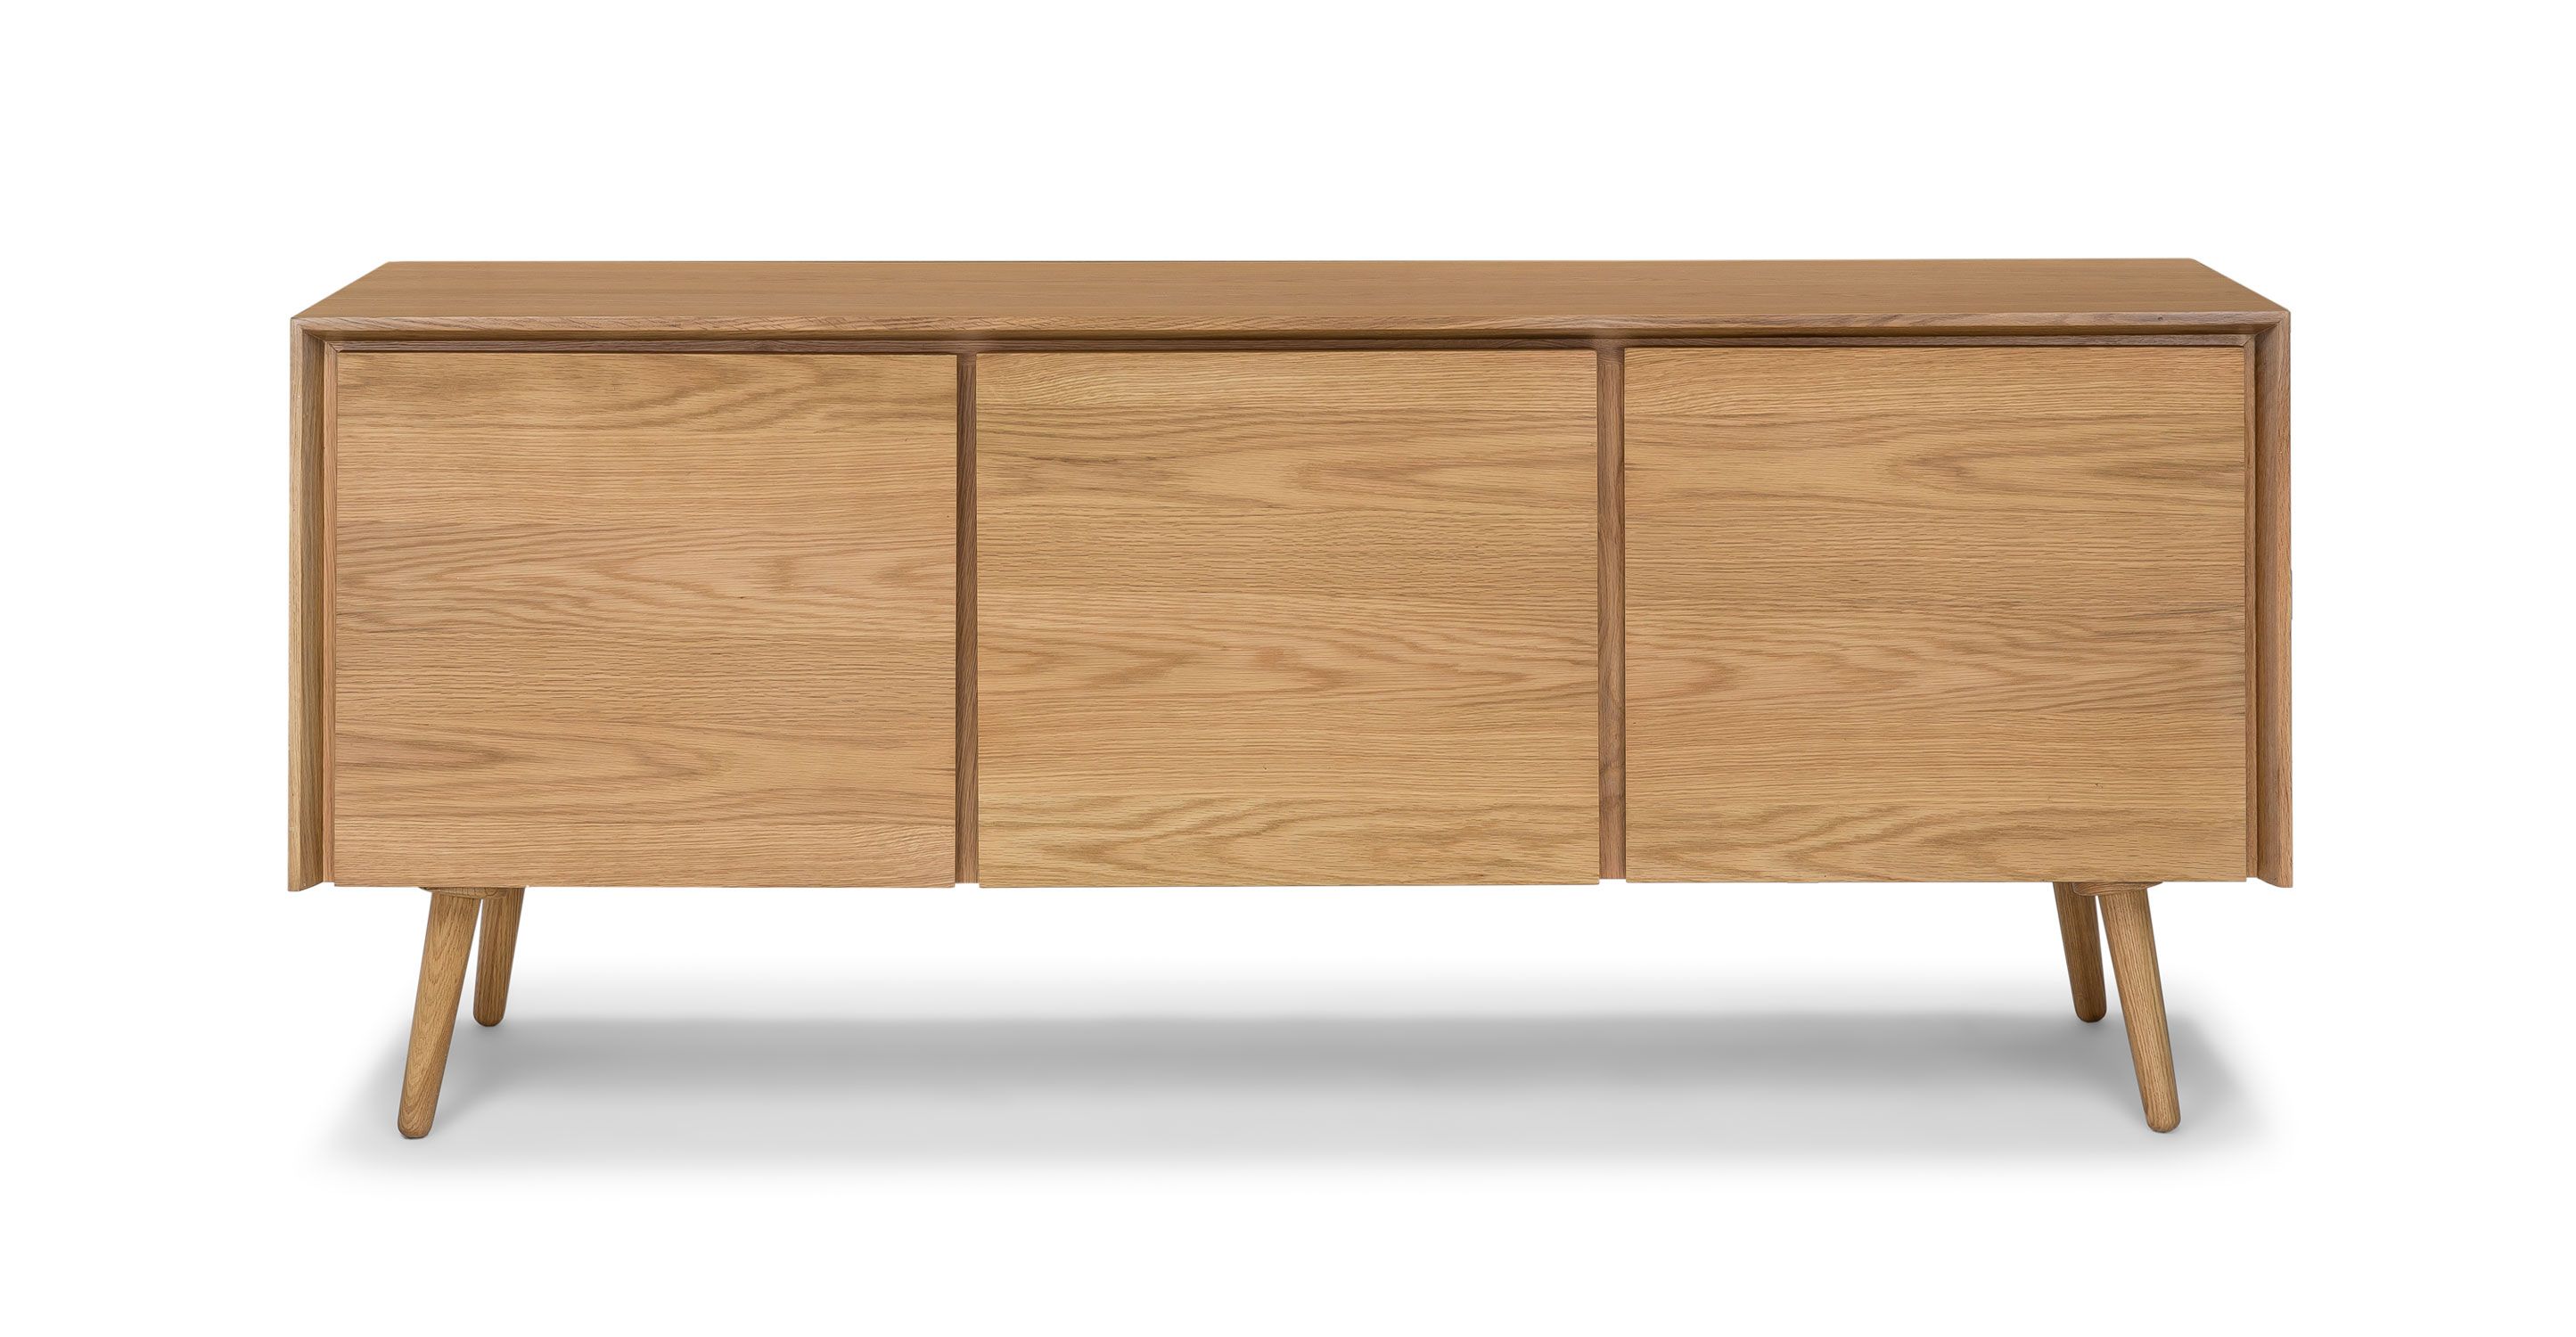 Seno 71" Oak Sideboard With Storage | Article Intended For Most Current Transitional Oak Sideboards (View 4 of 15)